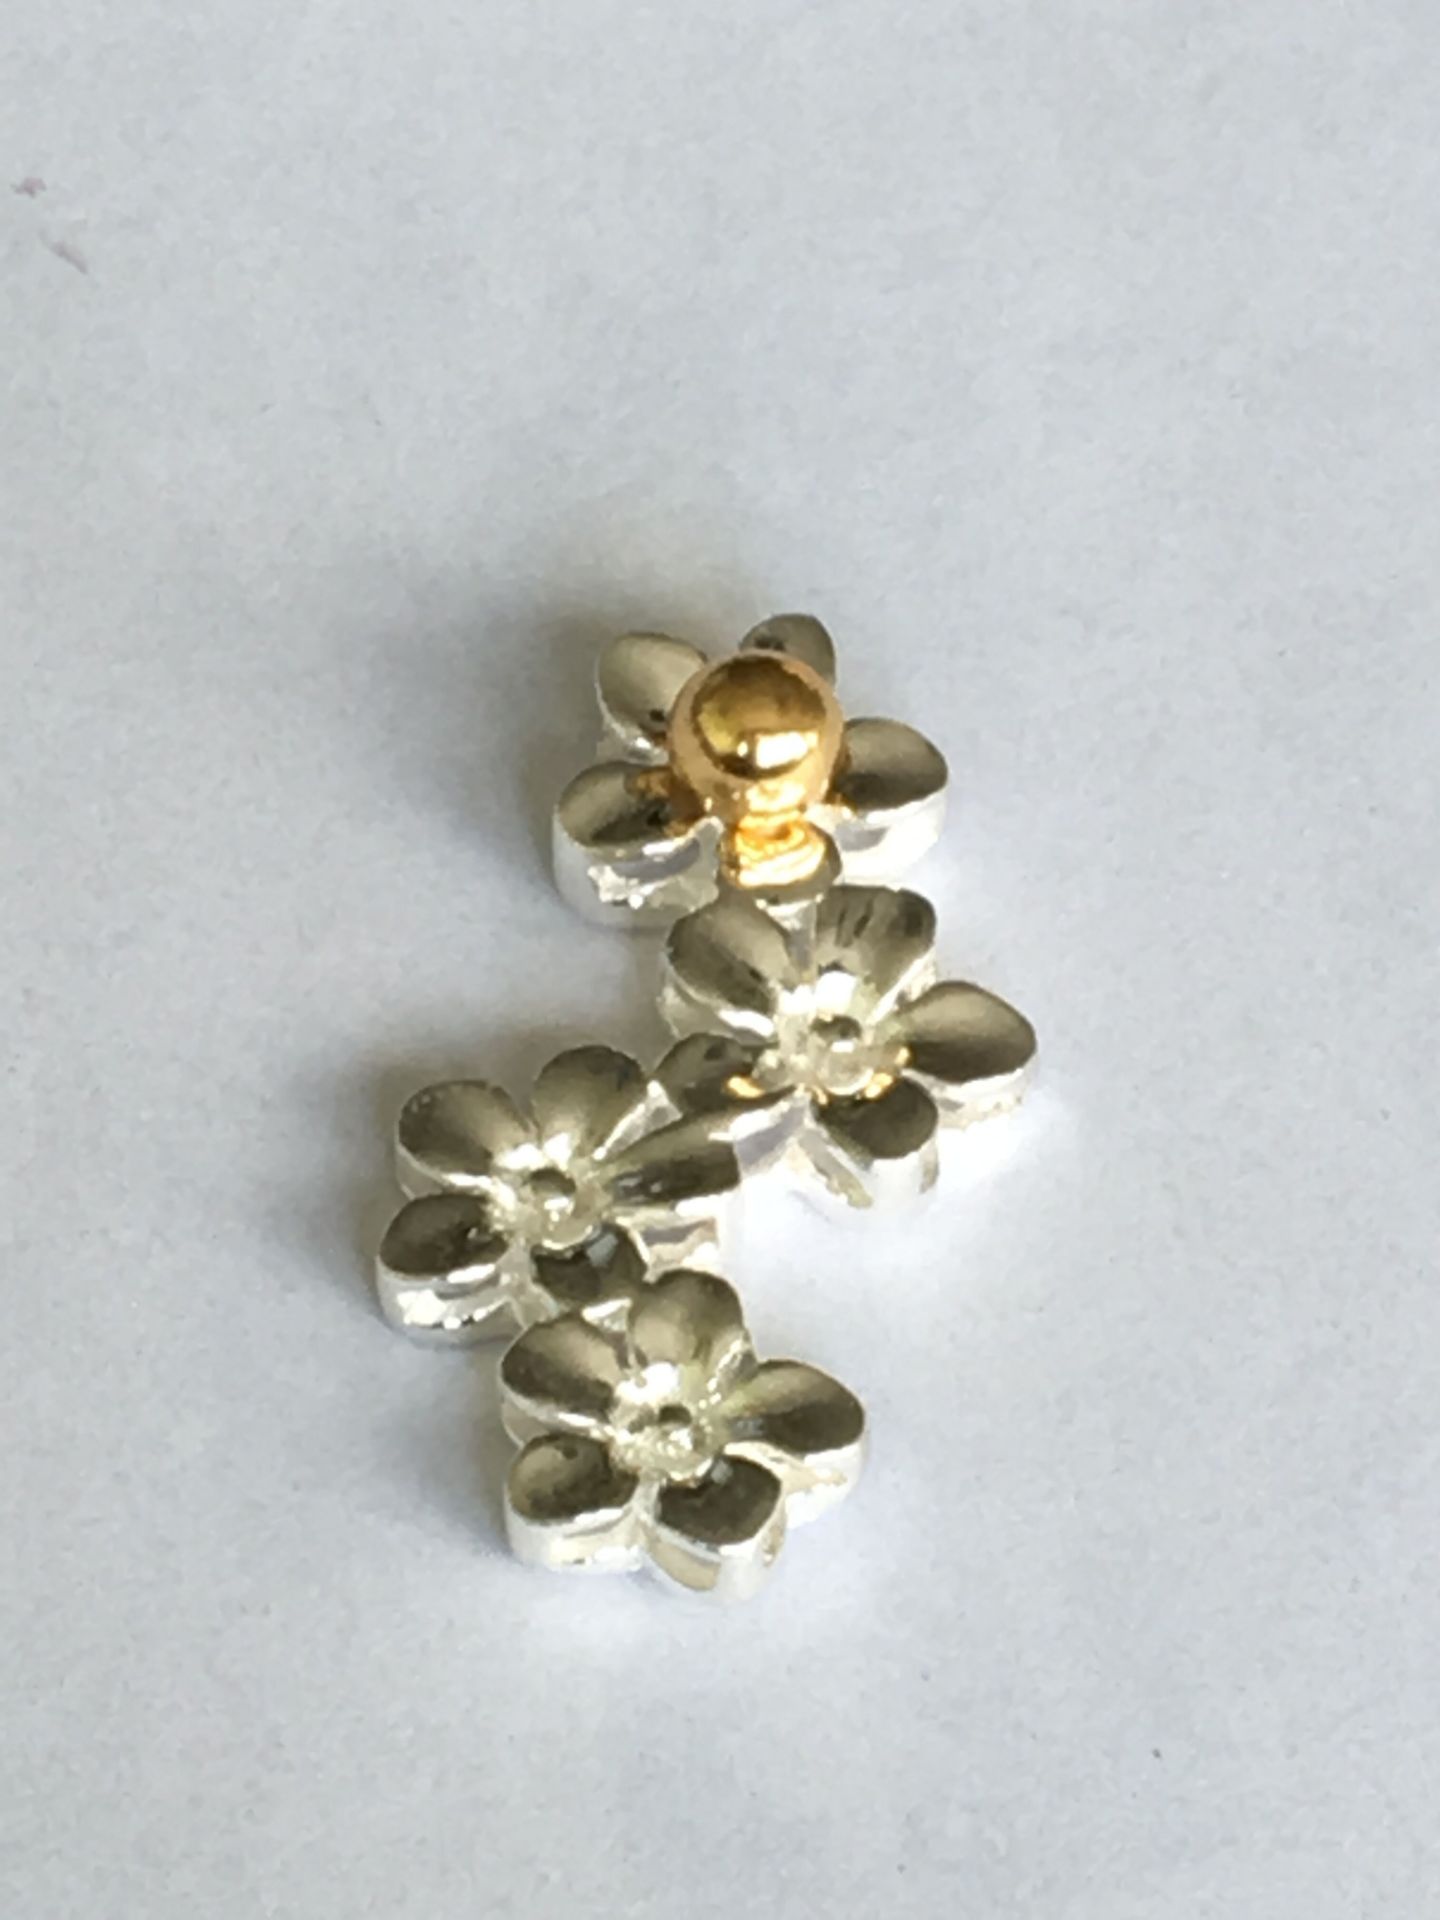 STERLING SILVER (STAMPED 925) PENDANT DROP IN THE FORM OF FOUR DAISY FLOWERS WITH A GOLD PLATED BALL